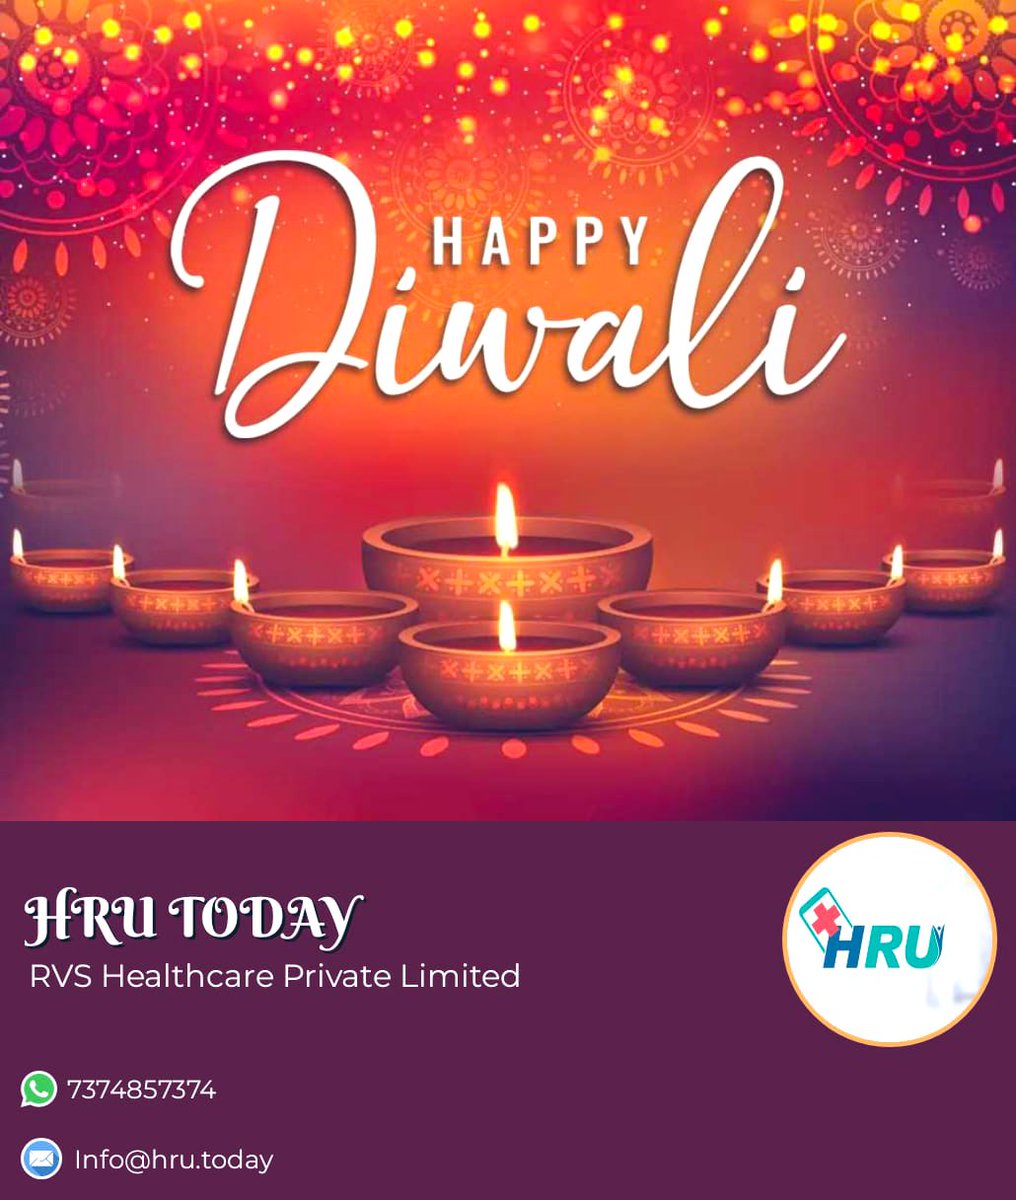 A very Happy and Healthy Diwali from HRU Family to you and yours…. 
#hrutoday #diwaliwishes #diwaligreetings #digitalhealth #digitalhealthcare #jaipur #india #doctormanagement #clinicsystem #healthcomesfirst